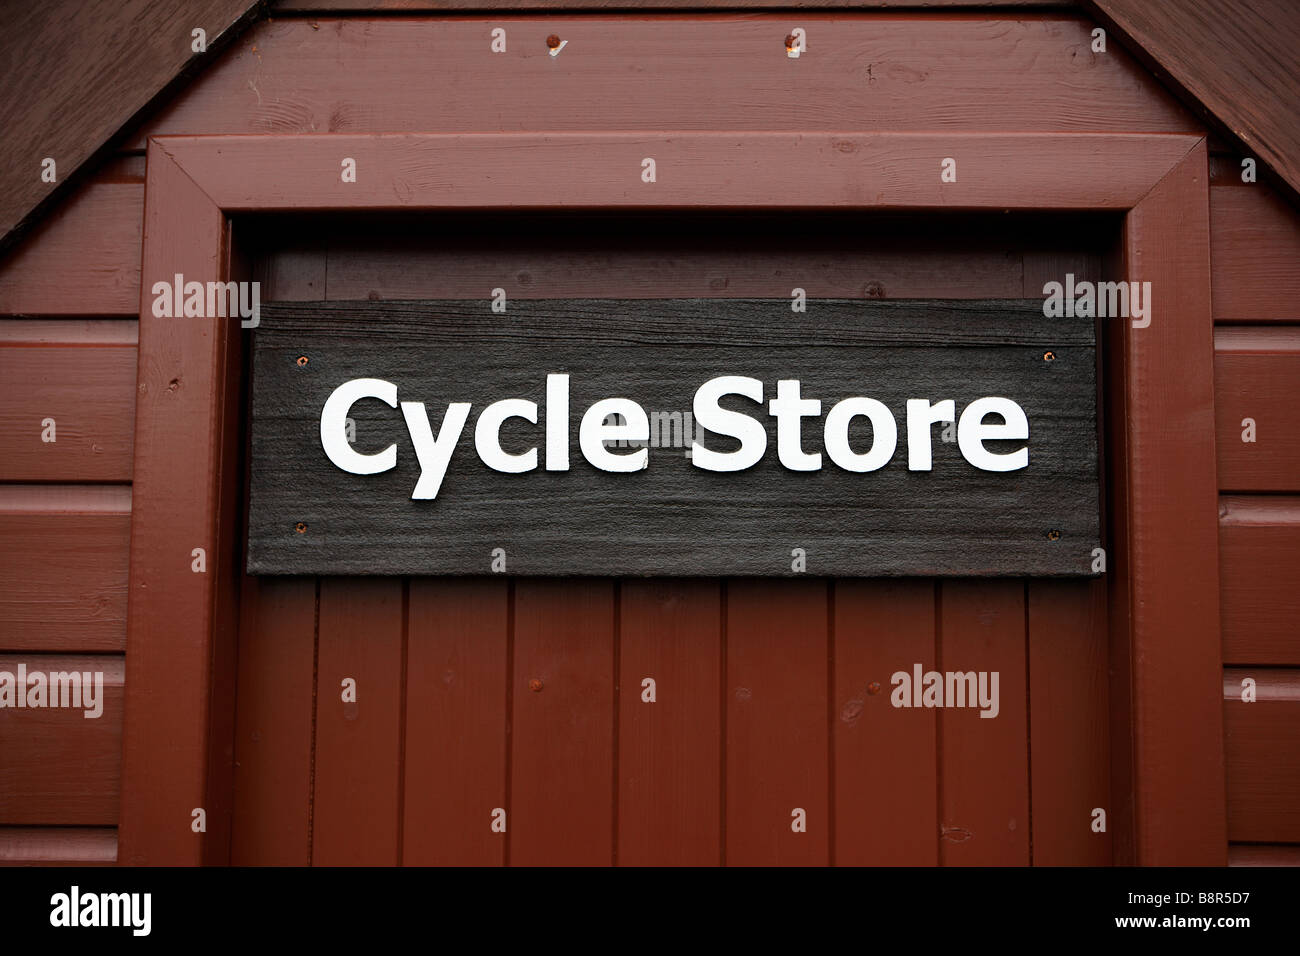 Cycle Store Stock Photo